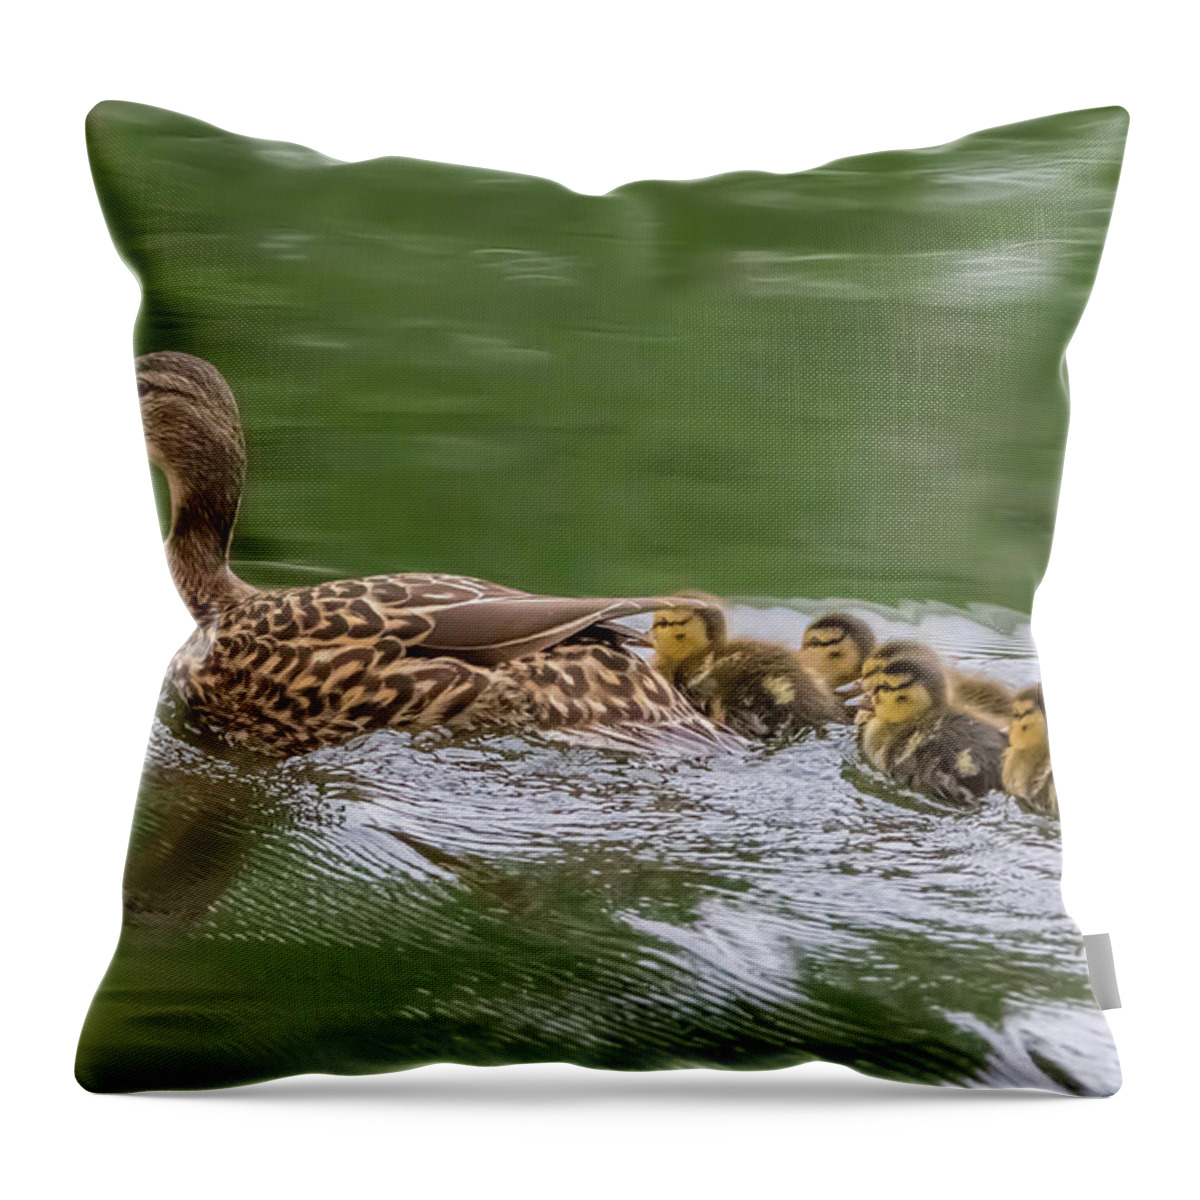 California Throw Pillow featuring the photograph Morning Swim by Marc Crumpler